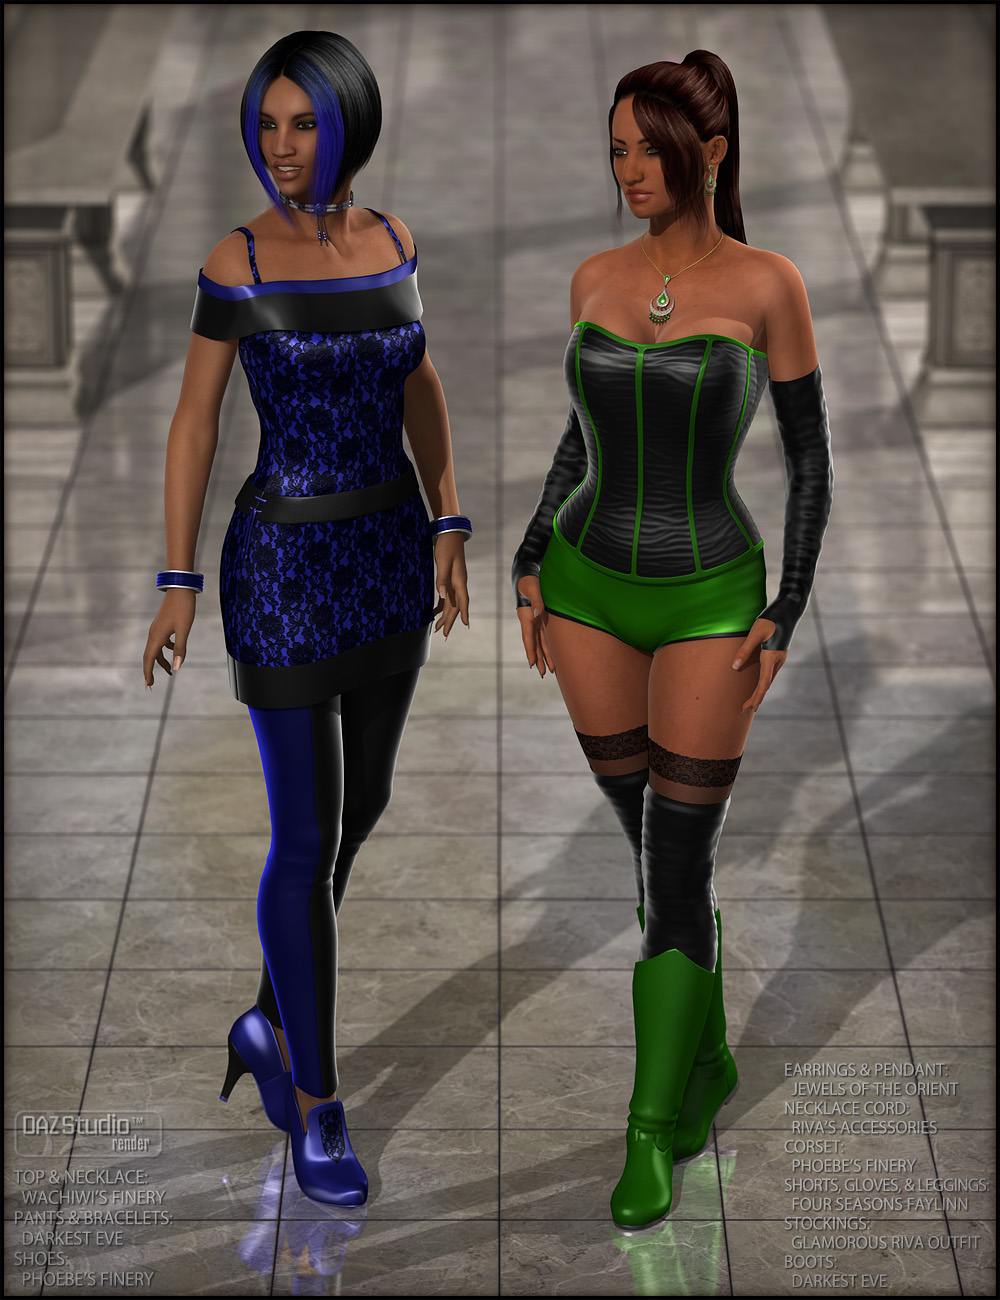 Phoebe's Fancy - Shaders for DAZ Studio and Poser by: Fisty & Darc, 3D Models by Daz 3D